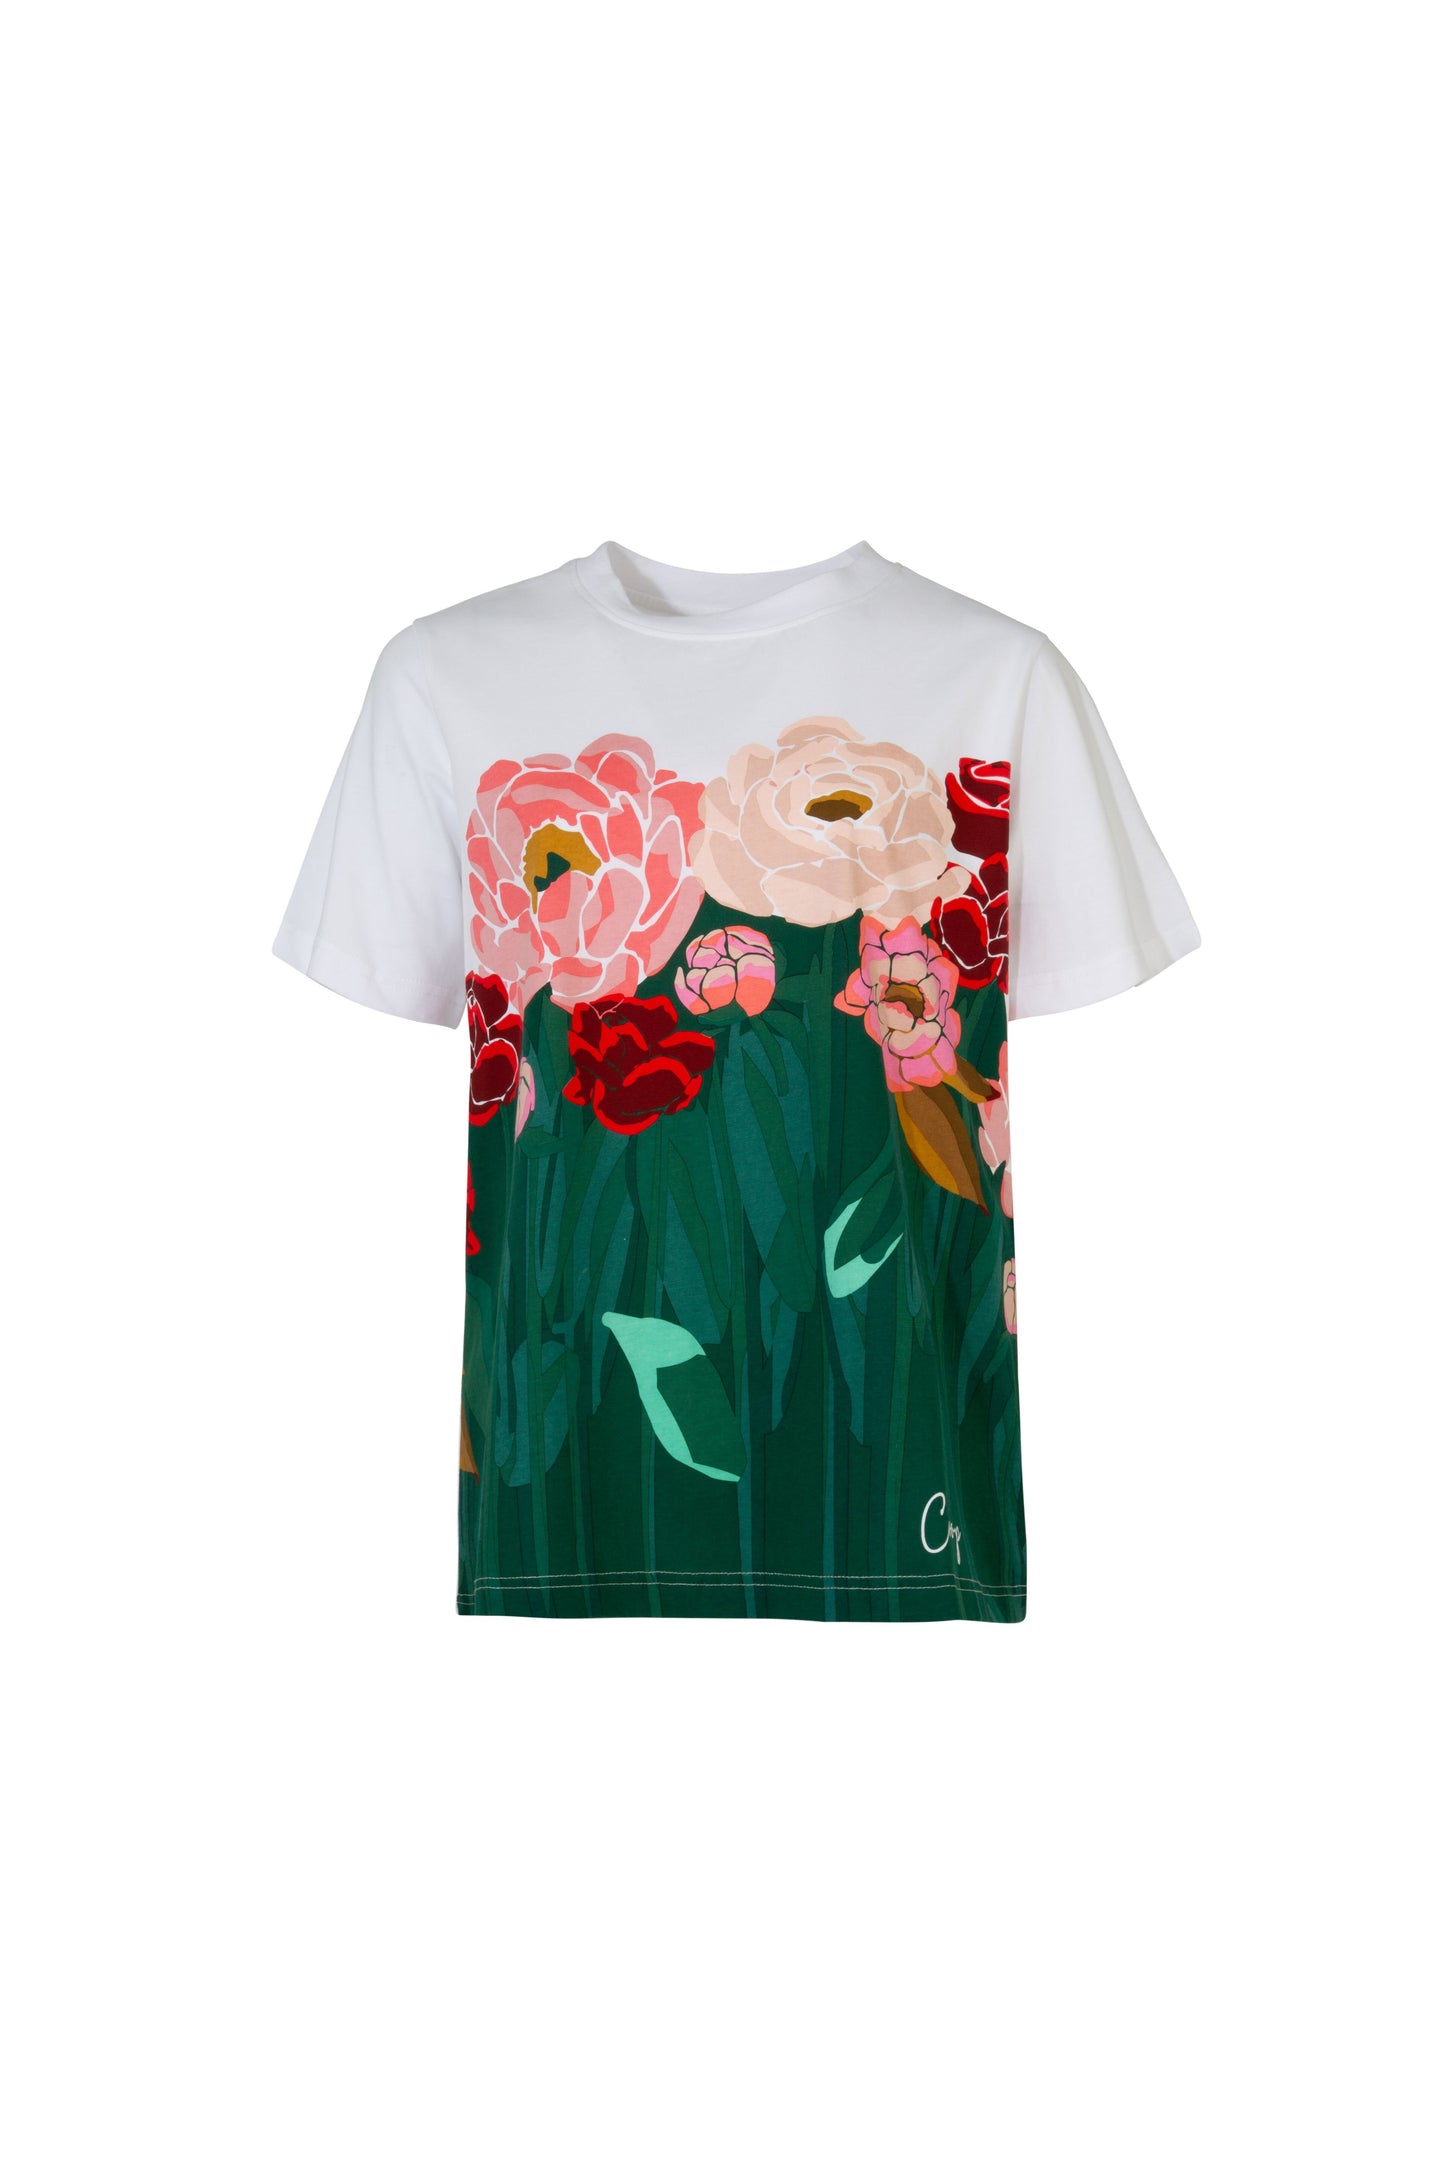 COOP TEE-SING YOU T-SHIRT - THE VOGUE STORE